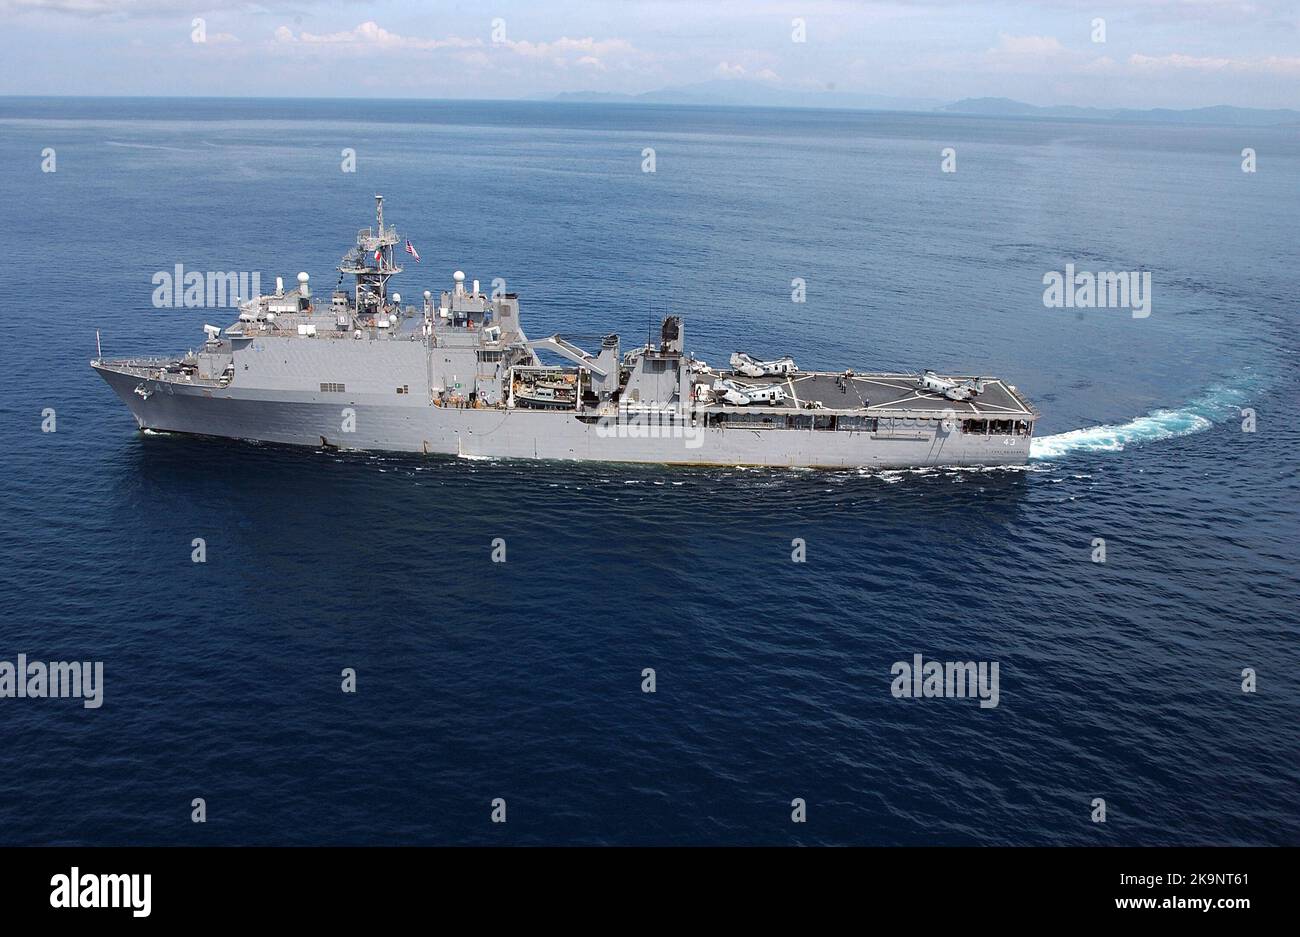 USS Fort McHenry (LSD-43) Whidbey Island-class dock landing ship of the United States Navy. Stock Photo